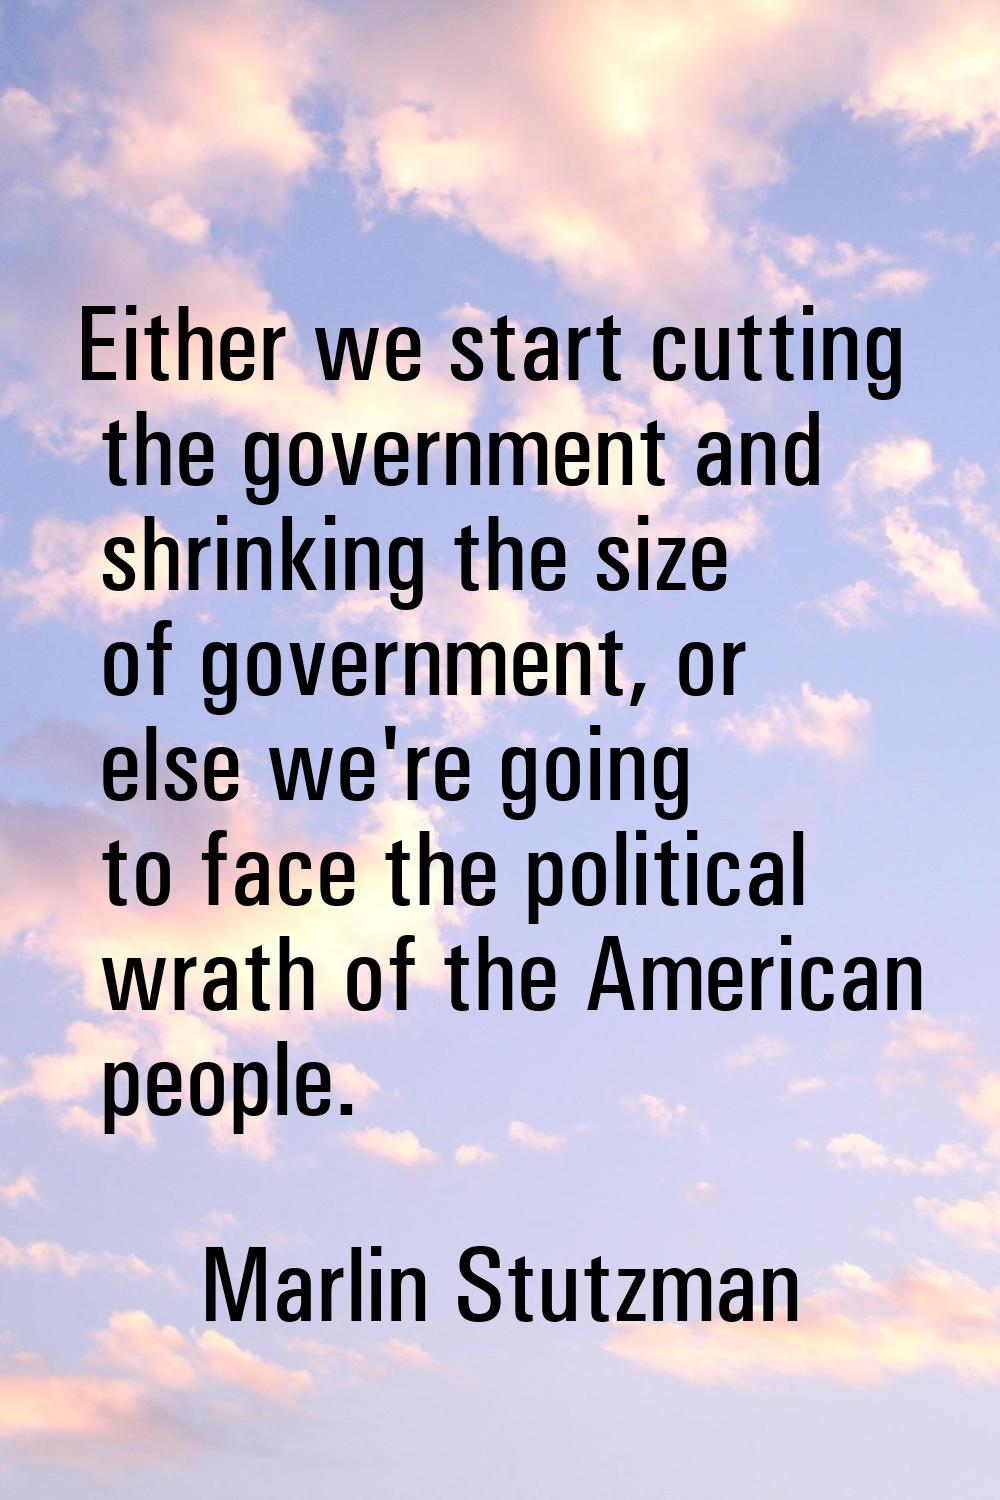 Either we start cutting the government and shrinking the size of government, or else we're going to